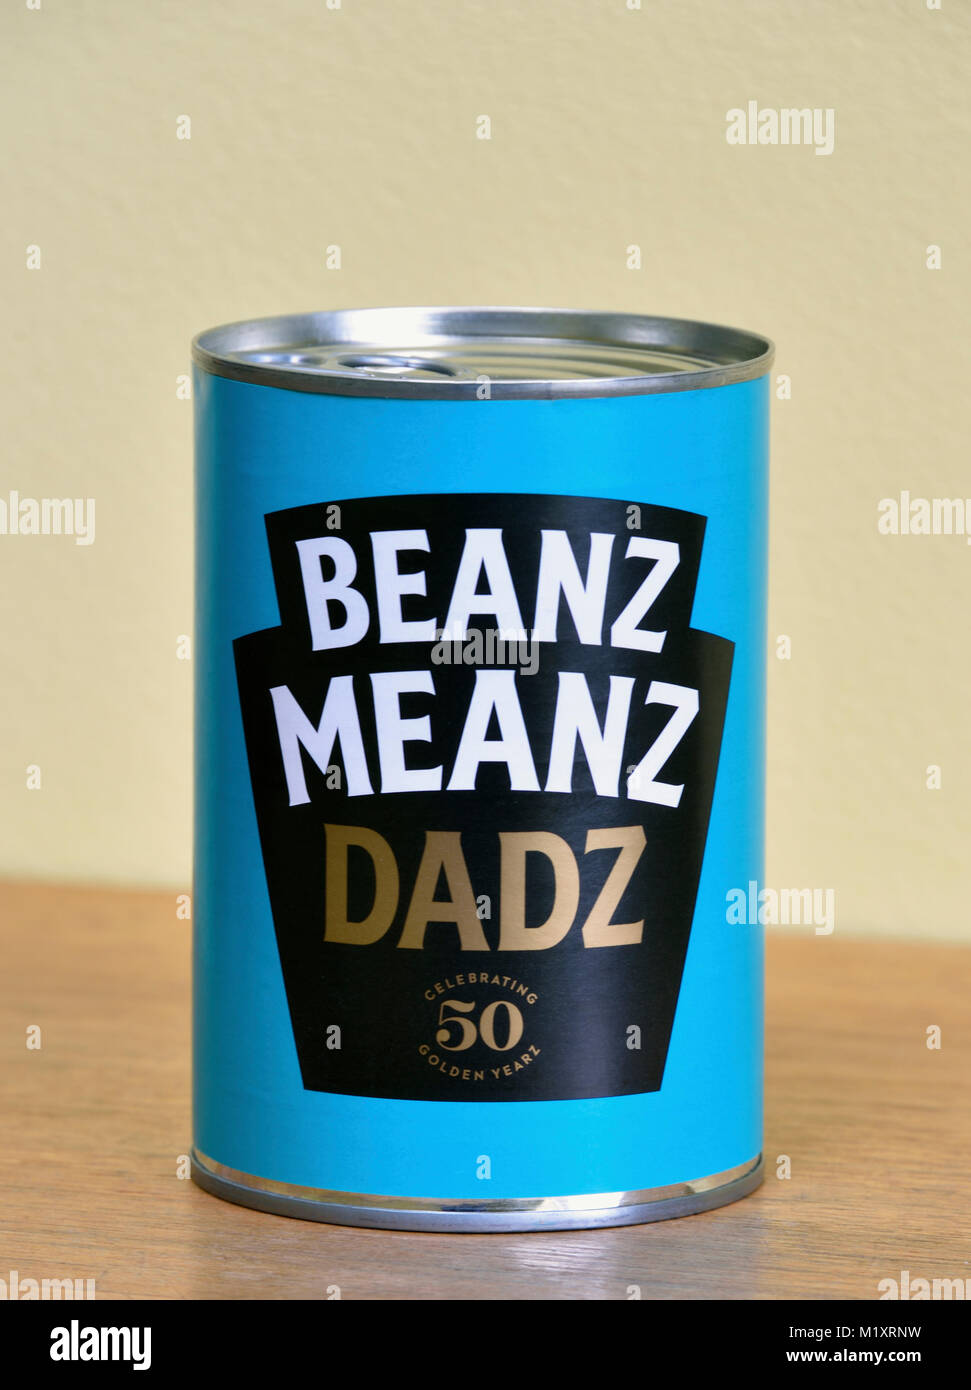 Beanz Meanz Dadz. Can of Heinz baked beans. Celebrating 50 golden years. Stock Photo